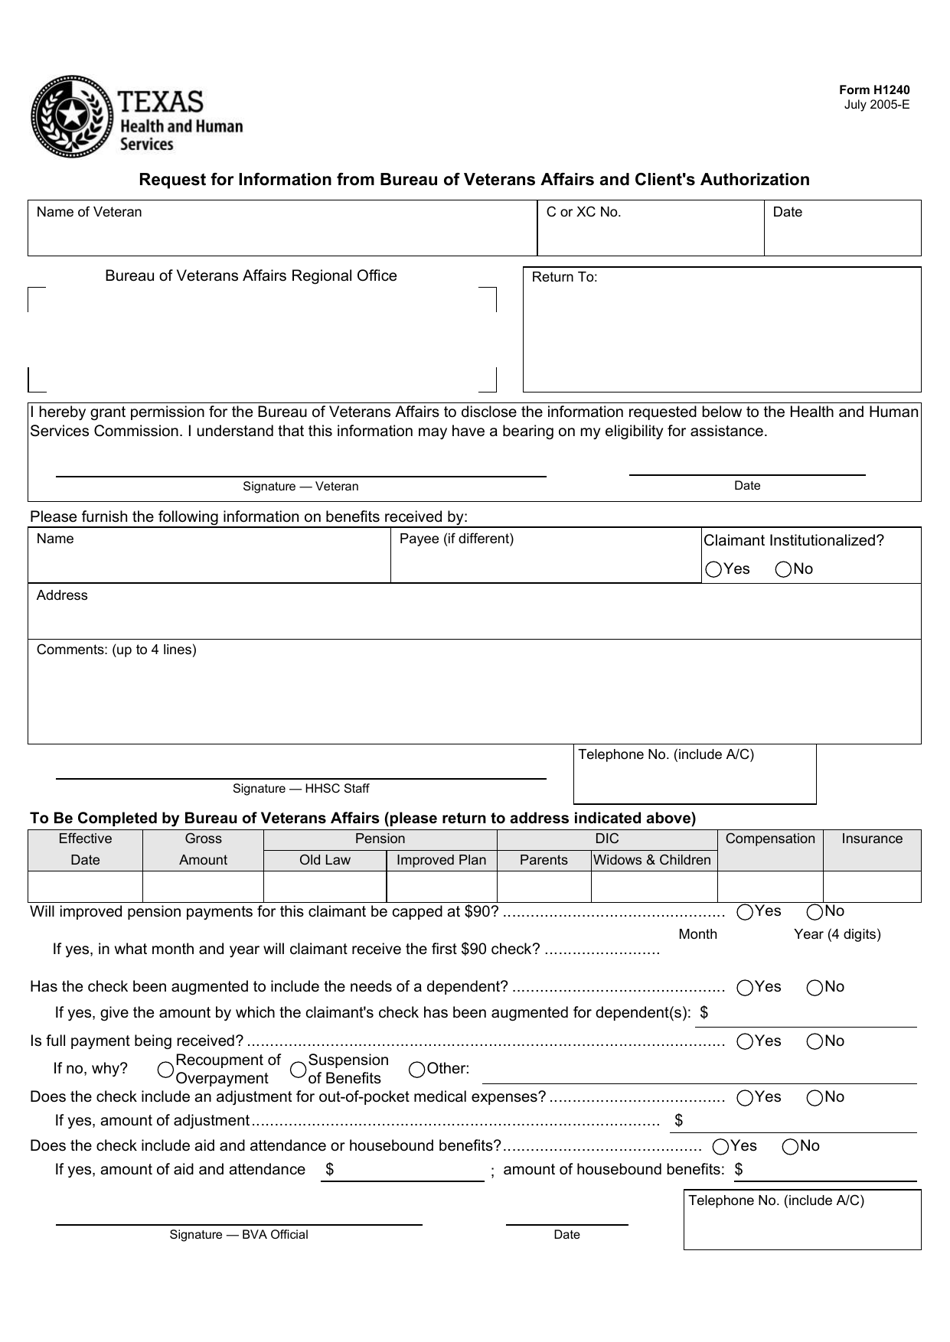 Form H1240 Request for Information From Bureau of Veterans Affairs and Clients Authorization - Texas, Page 1